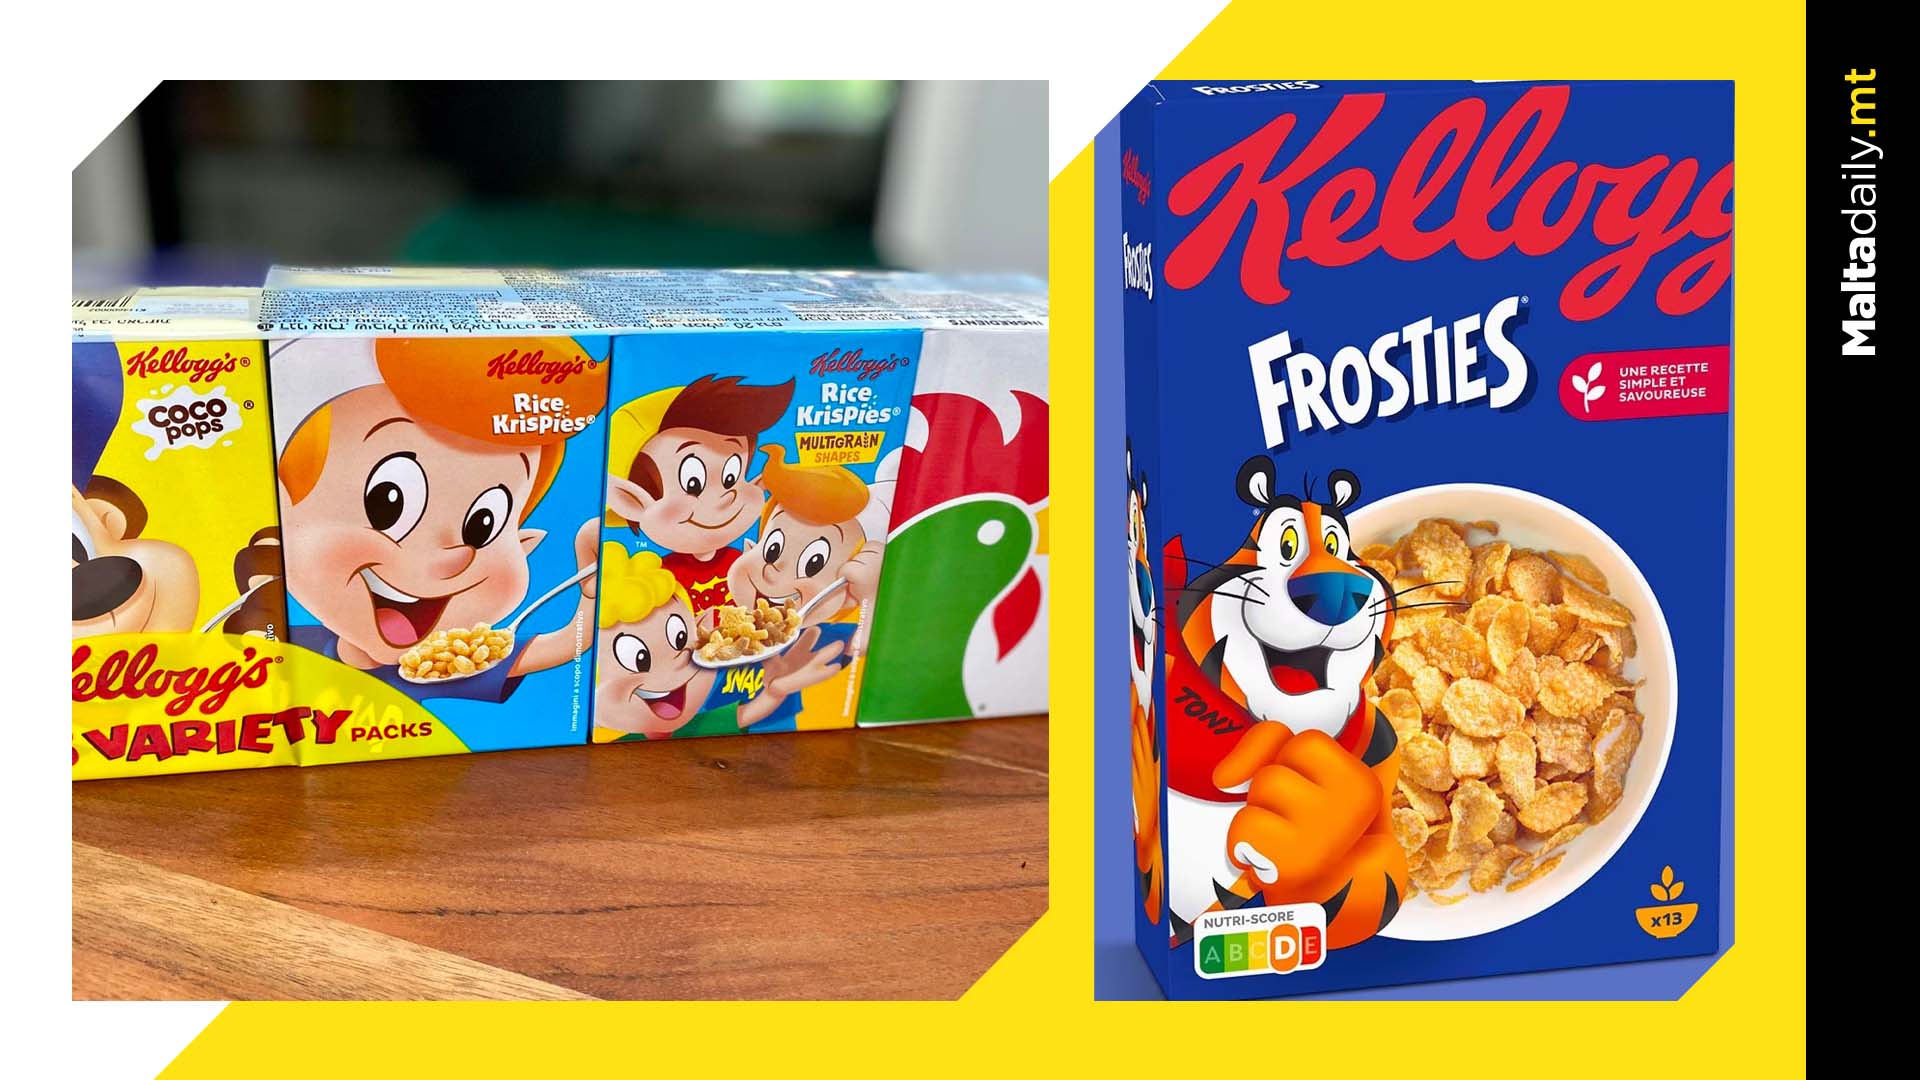 Frosties removed from Kellogg's cereal variety packs